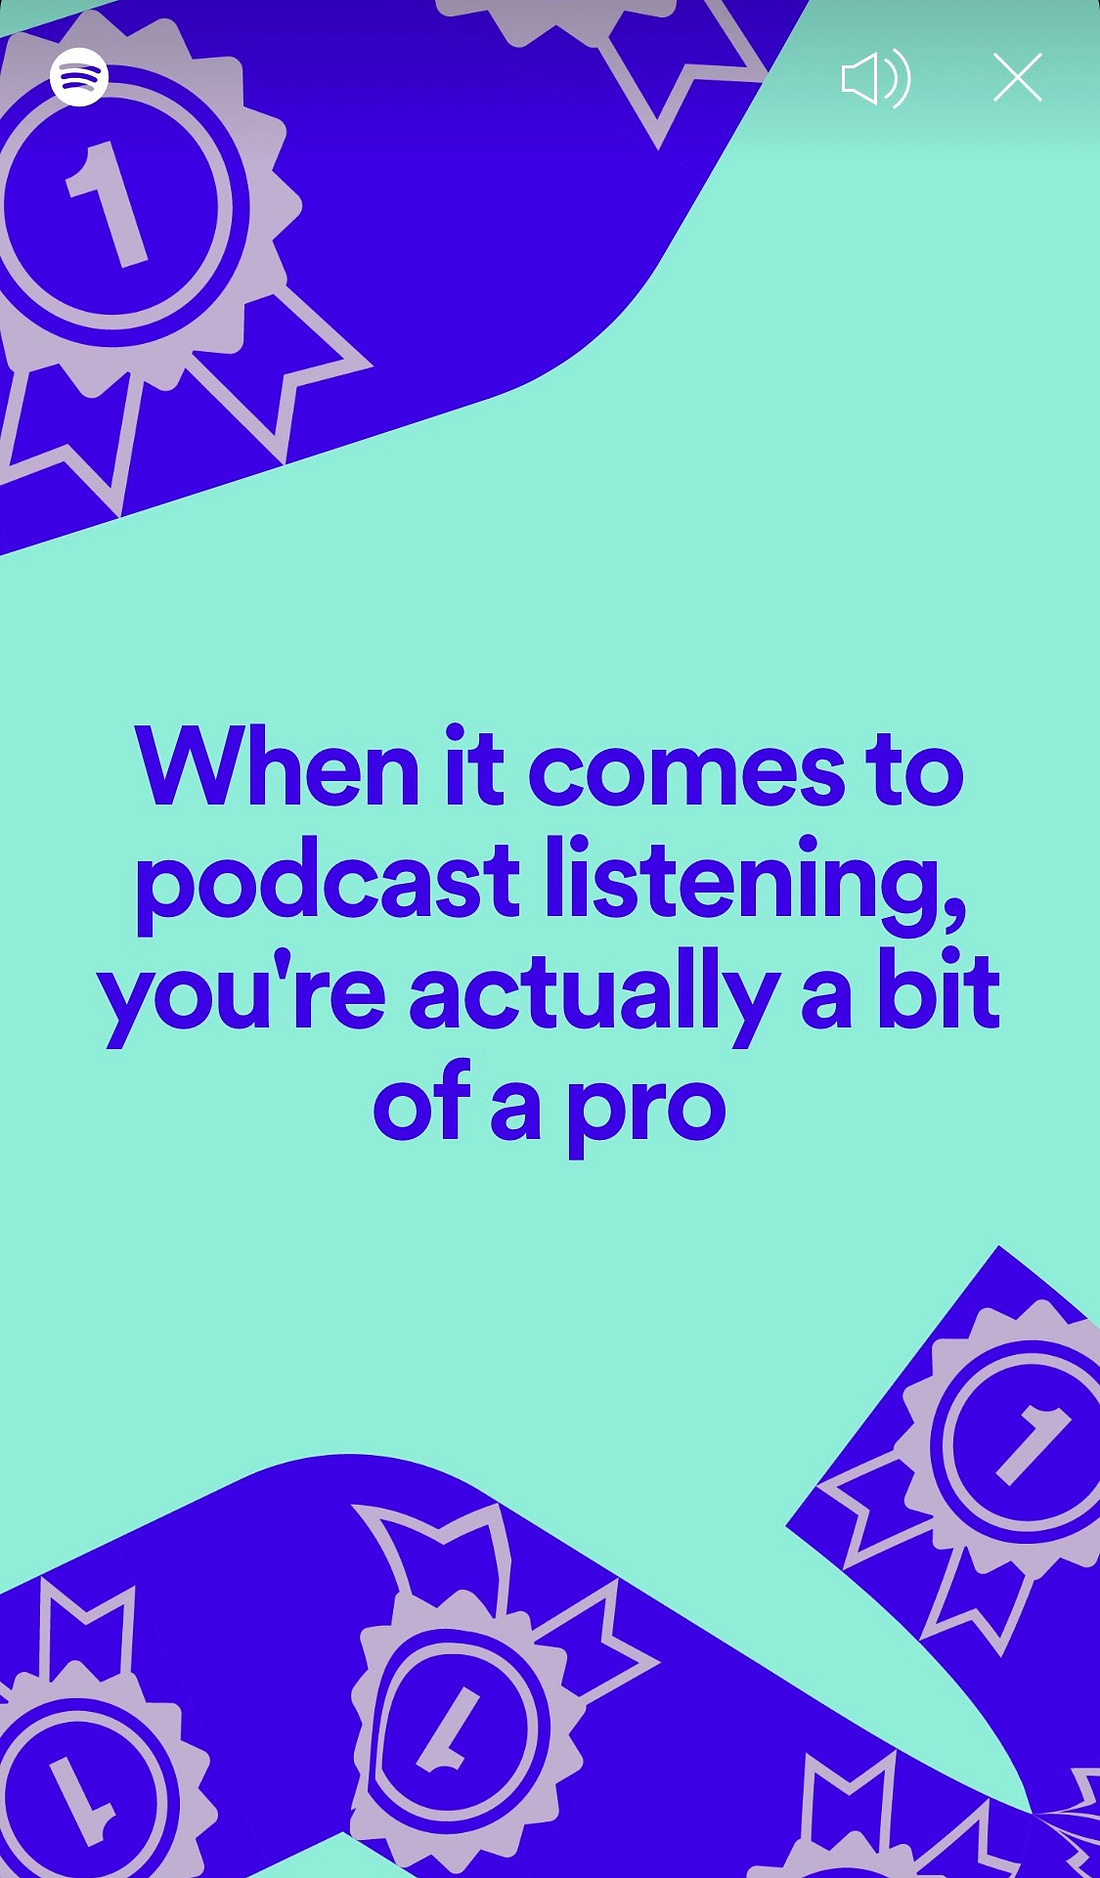 screenshot van Lieven’s Spotify Wrapped waarop staat: “when it comes to podcast listening, you’re actually a bit of a pro”